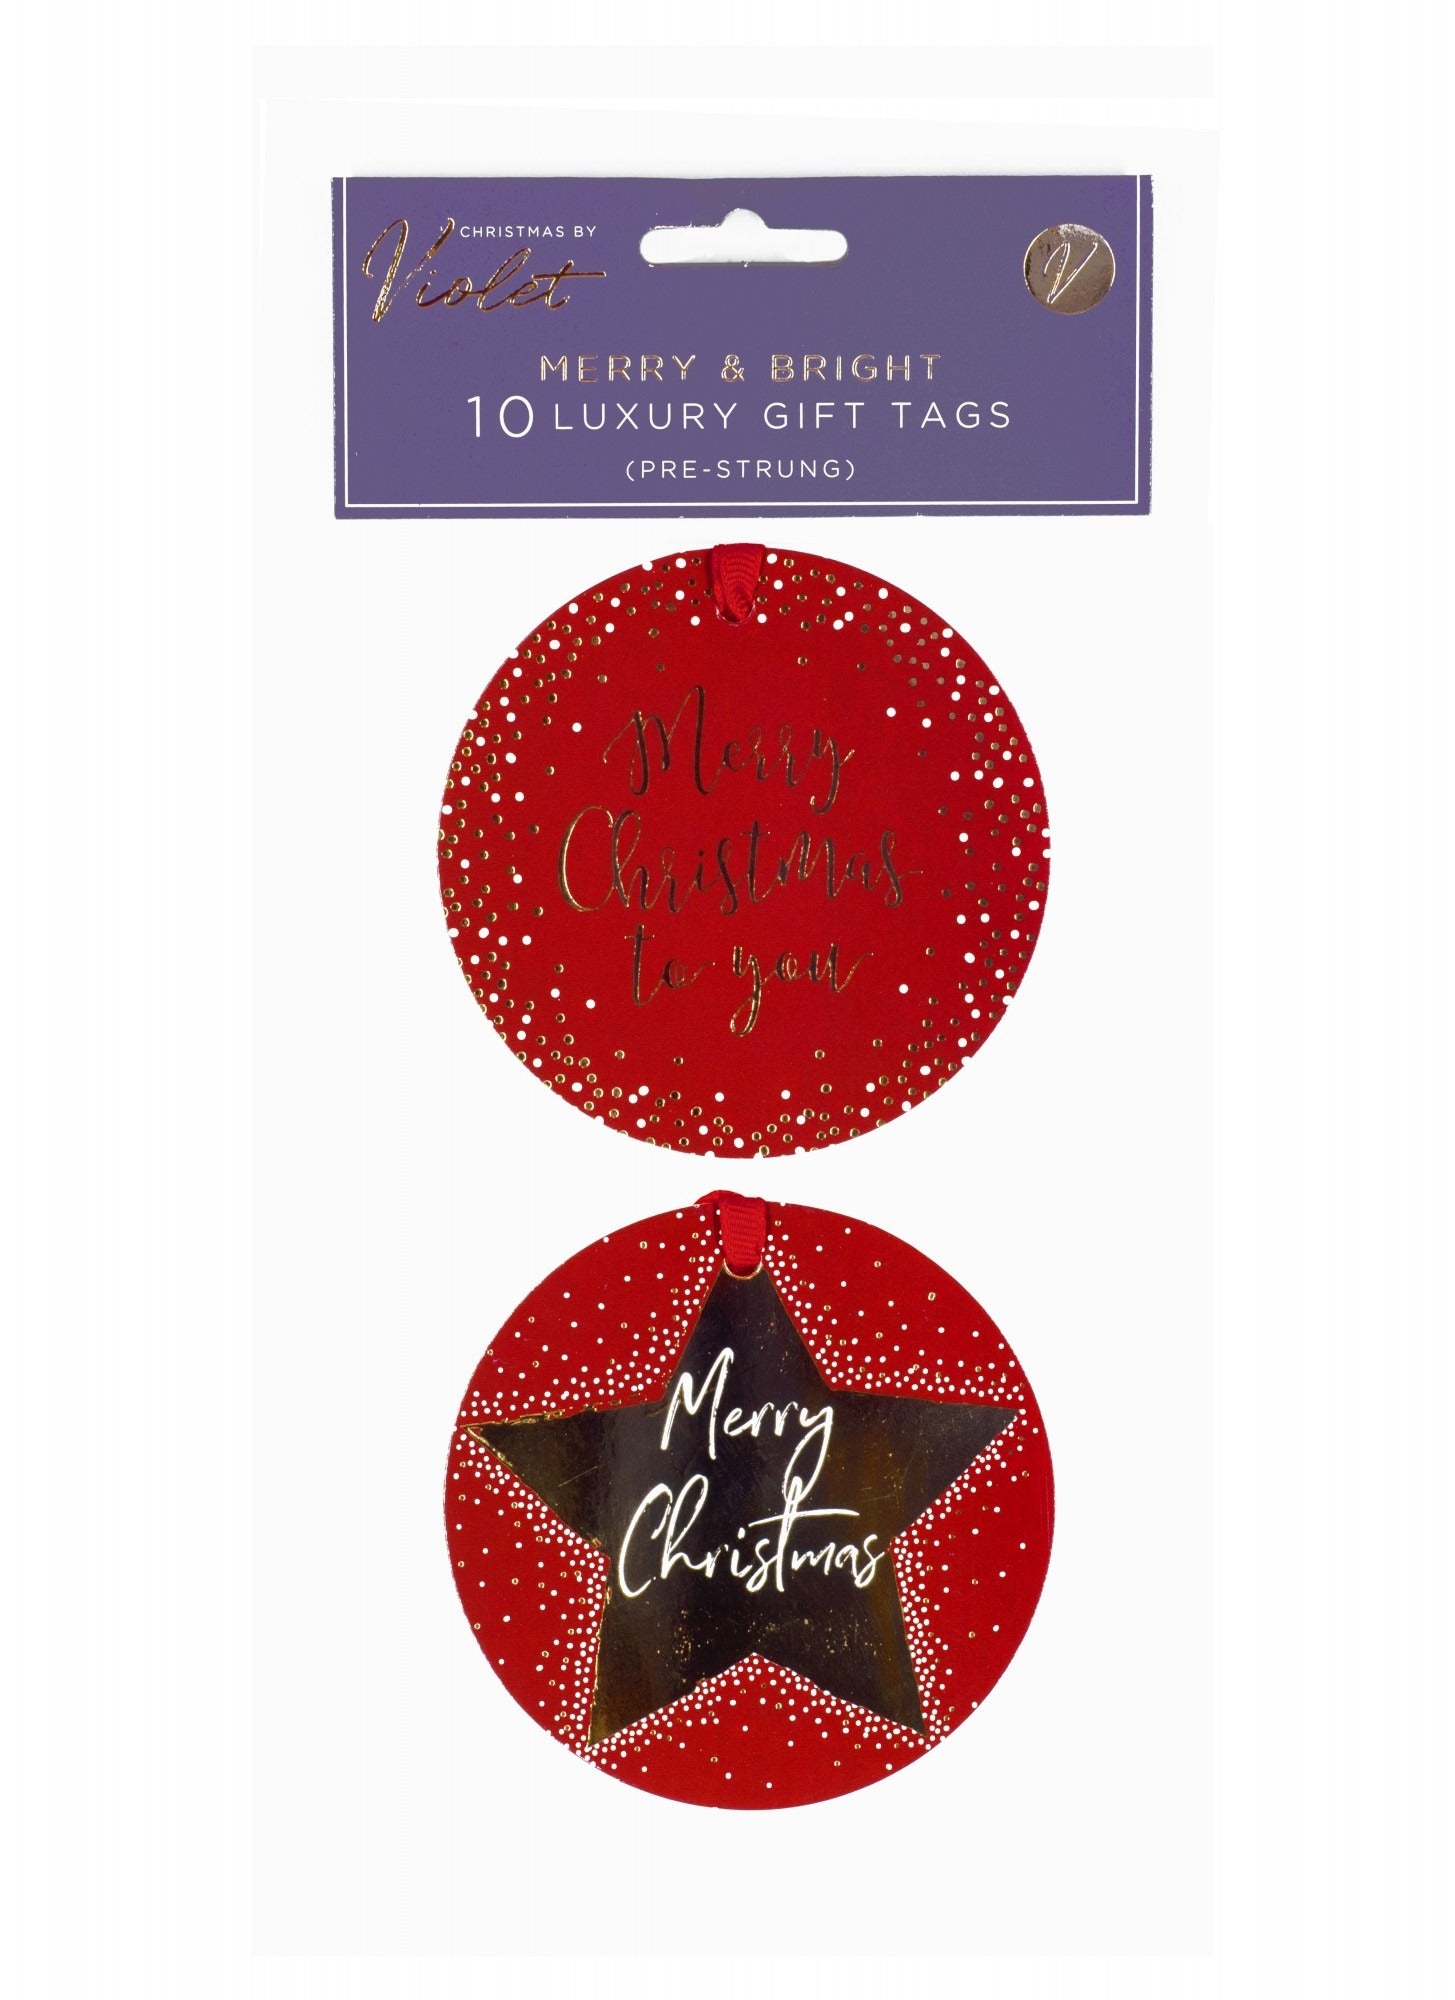 View Merry and Bright Gift Tags x10 information